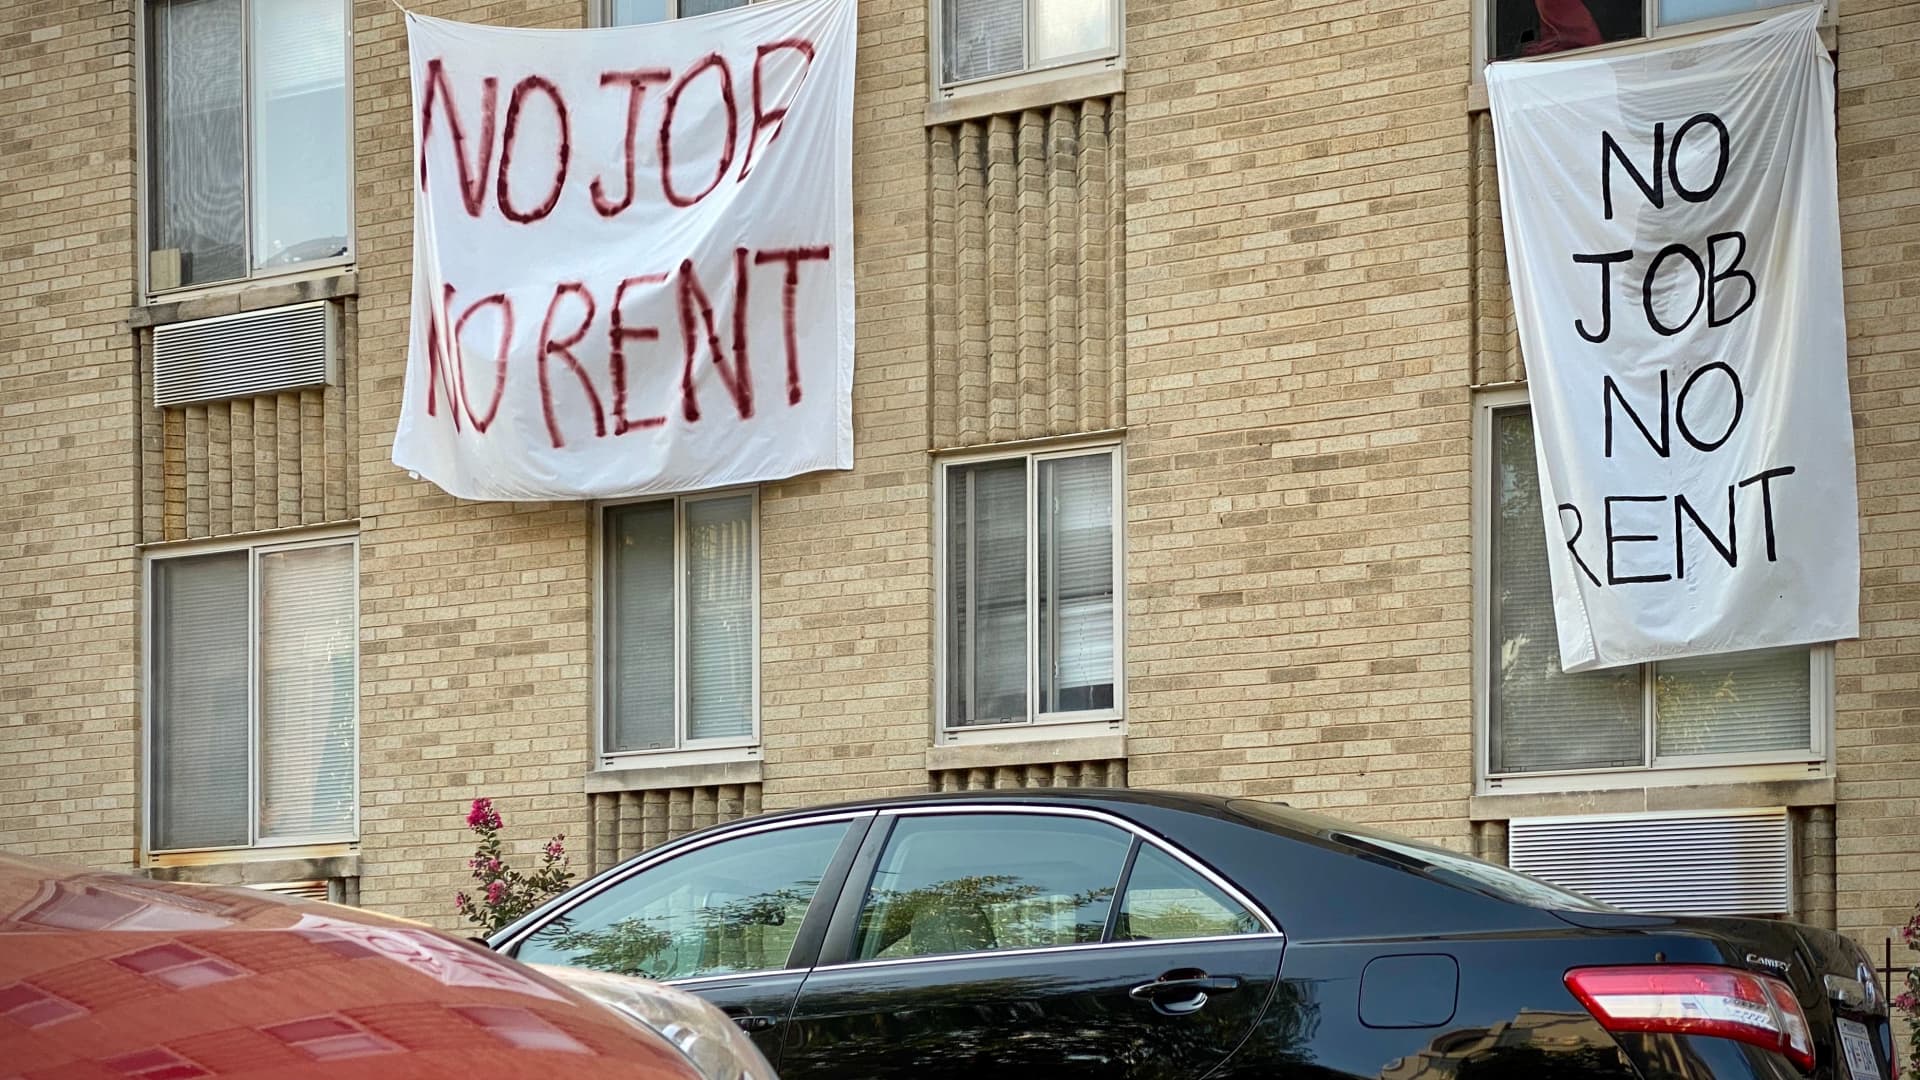 Anti-eviction banners are displayed on a rent-controlled building in Washington, D.C., on Aug. 9, 2020.